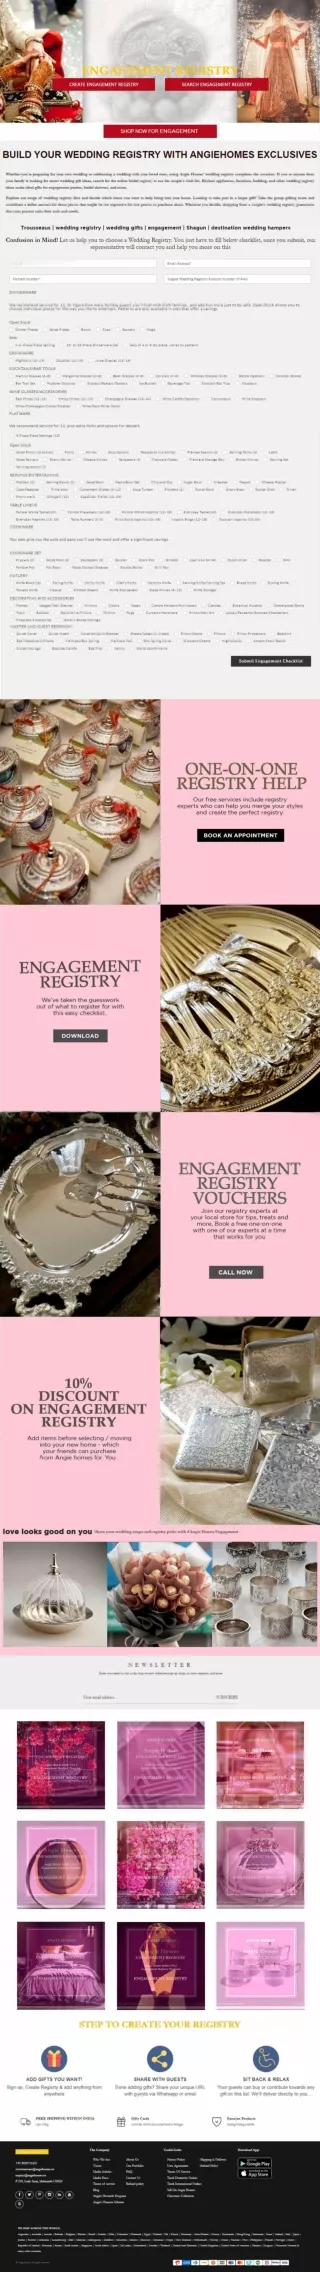 Build your wedding registry with Angie Homes Exclusives